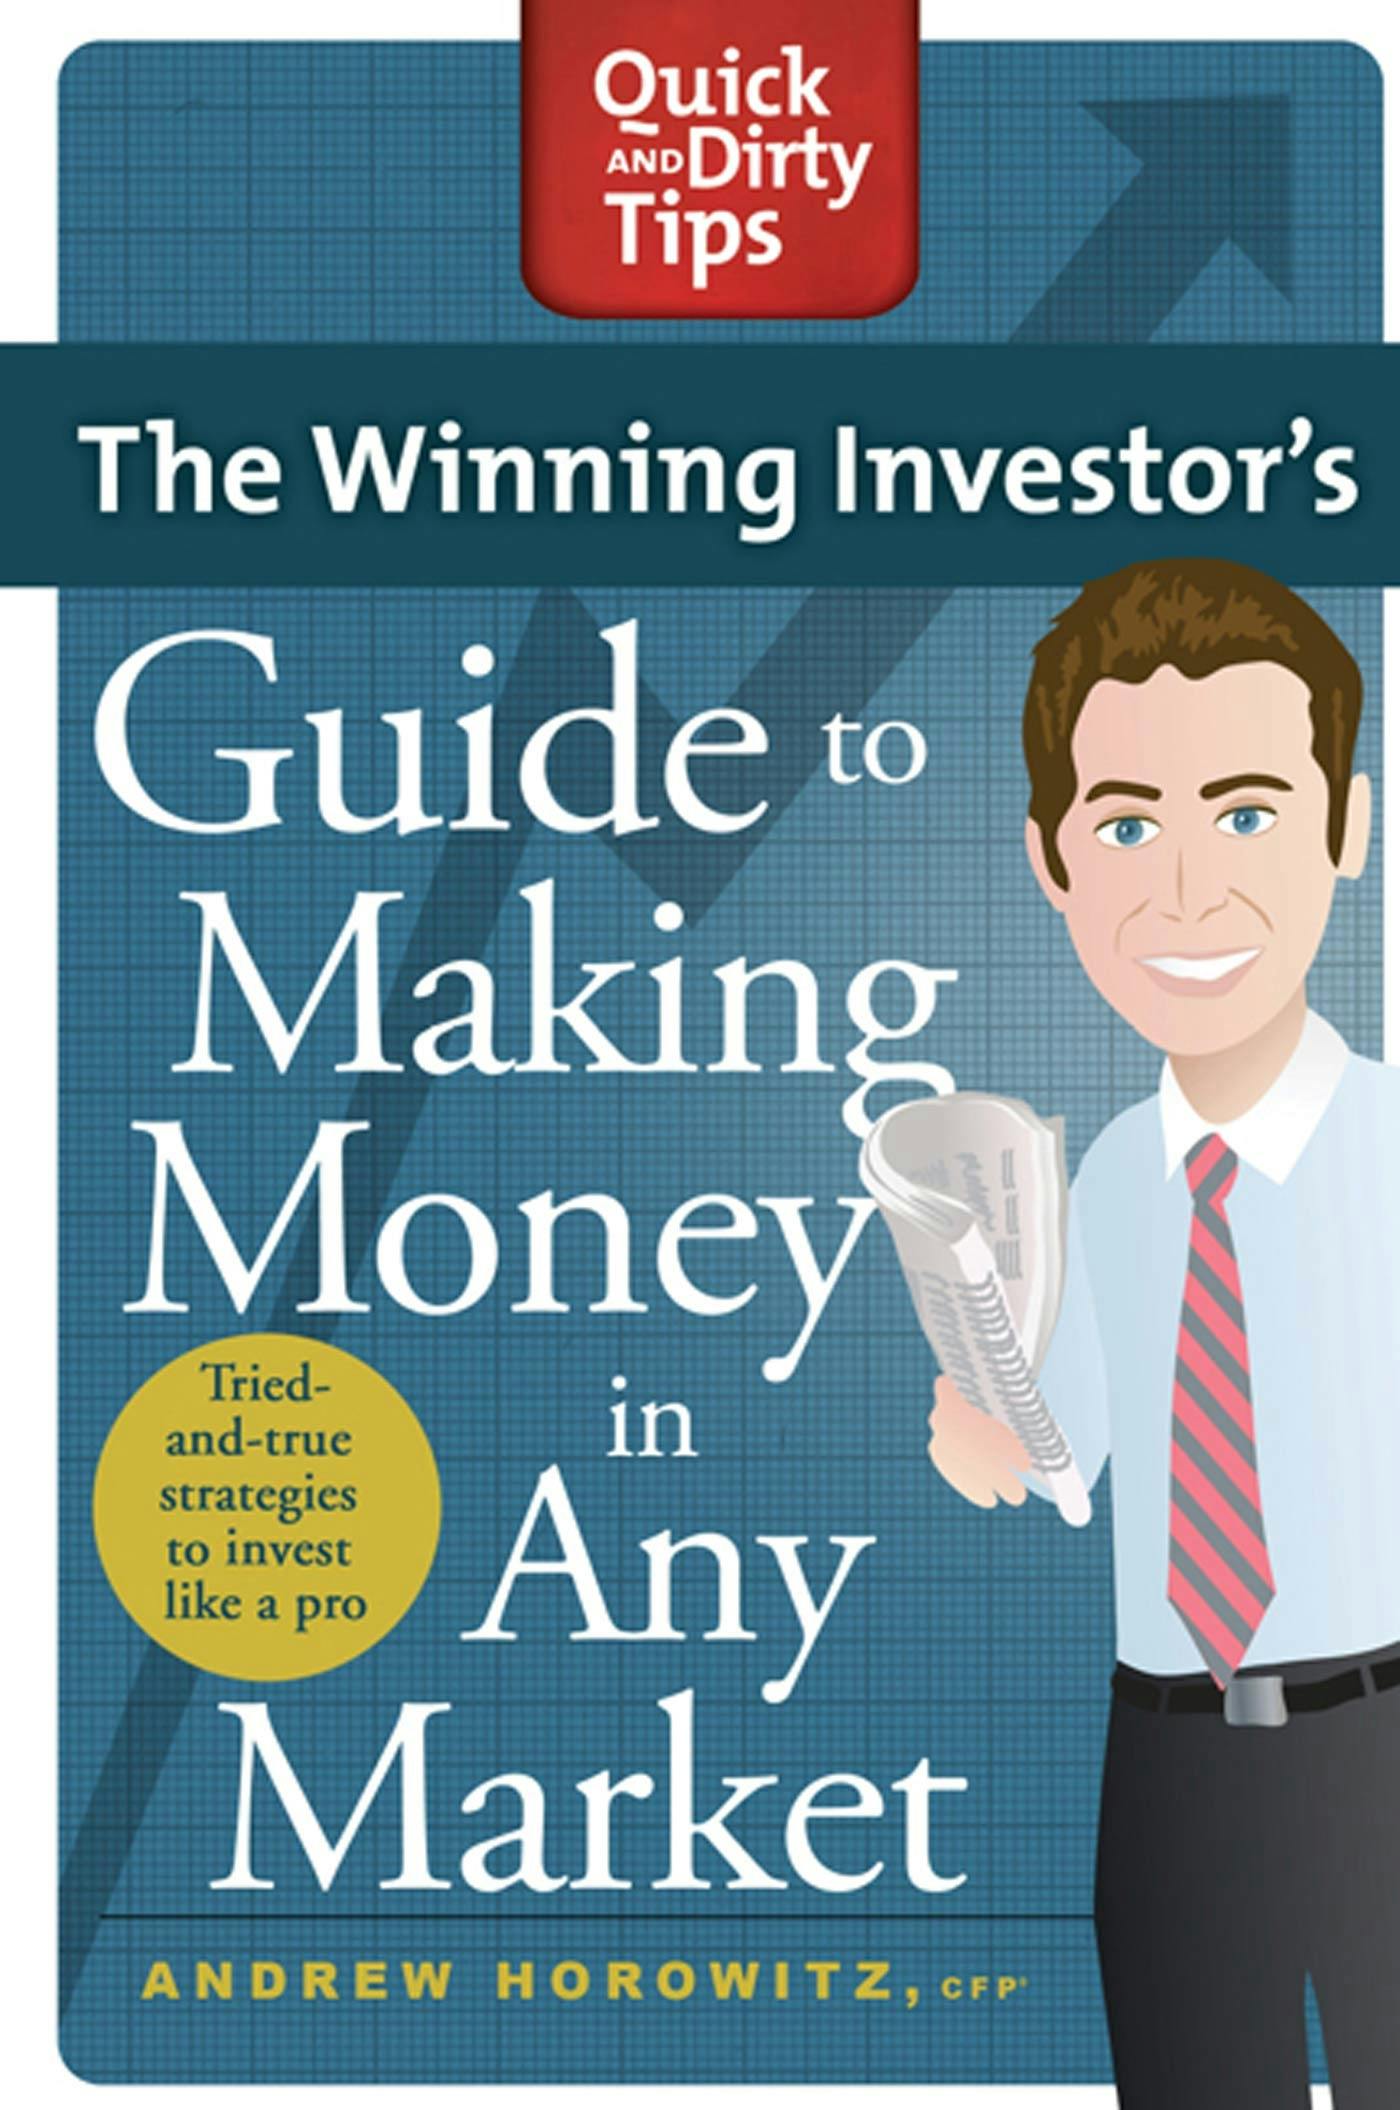 The Winning Investor's Guide to Making Money in Any Market